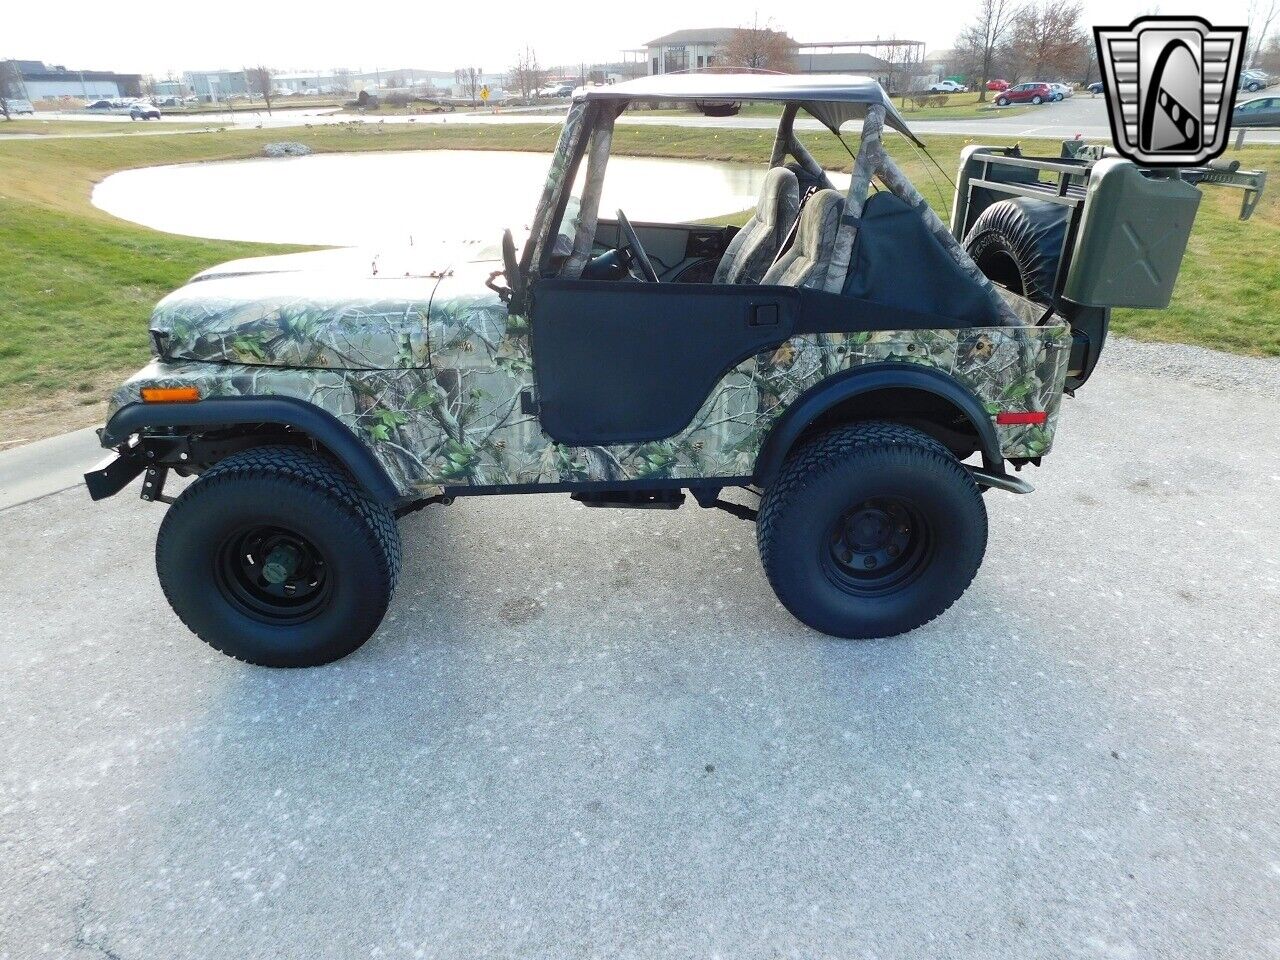 Camo 1978 Jeep CJ5  304 cubic inch V8 T18 4-speed Manual Available Now!